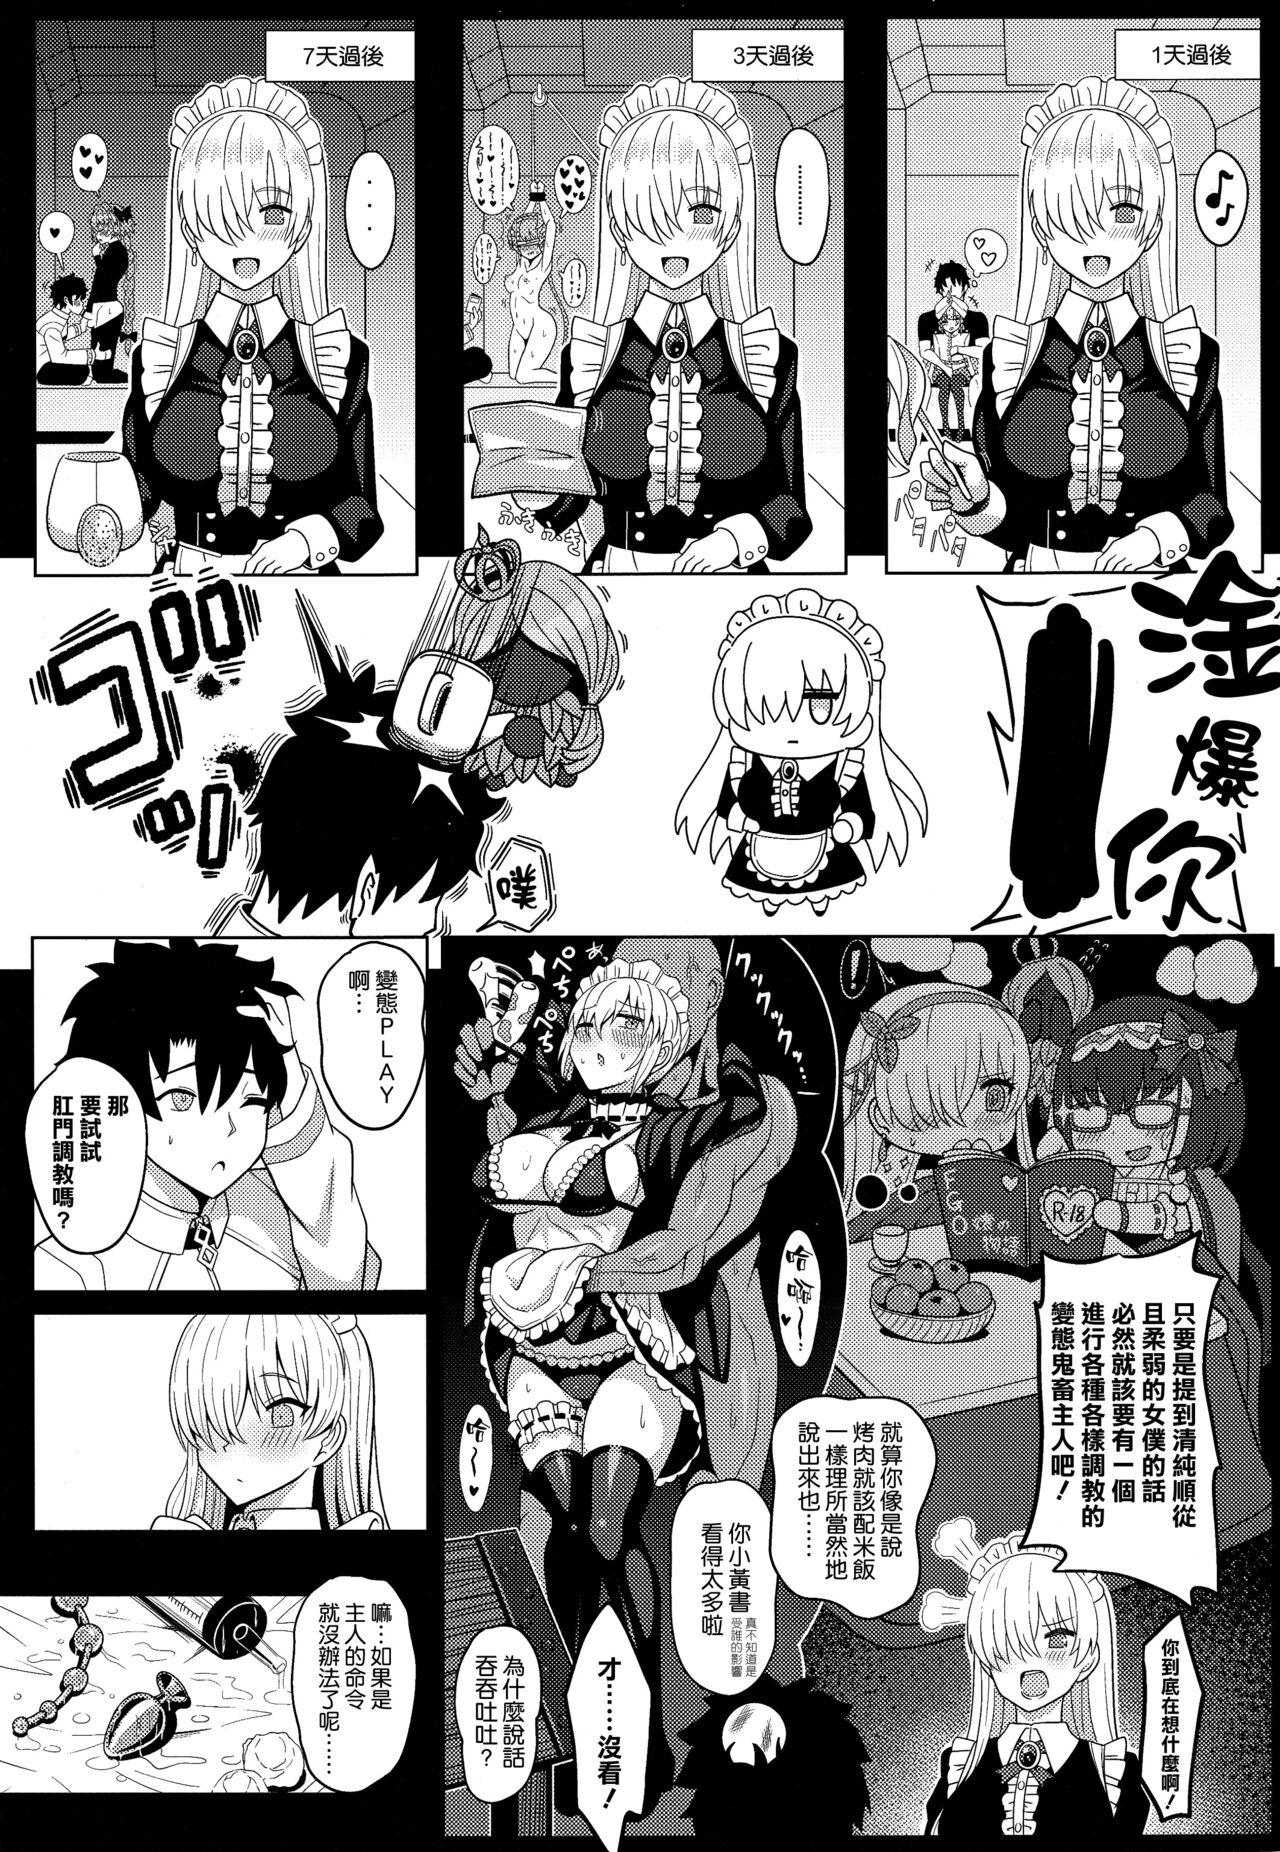 Webcams 皇女様と卵 - Fate grand order Milfporn - Page 7